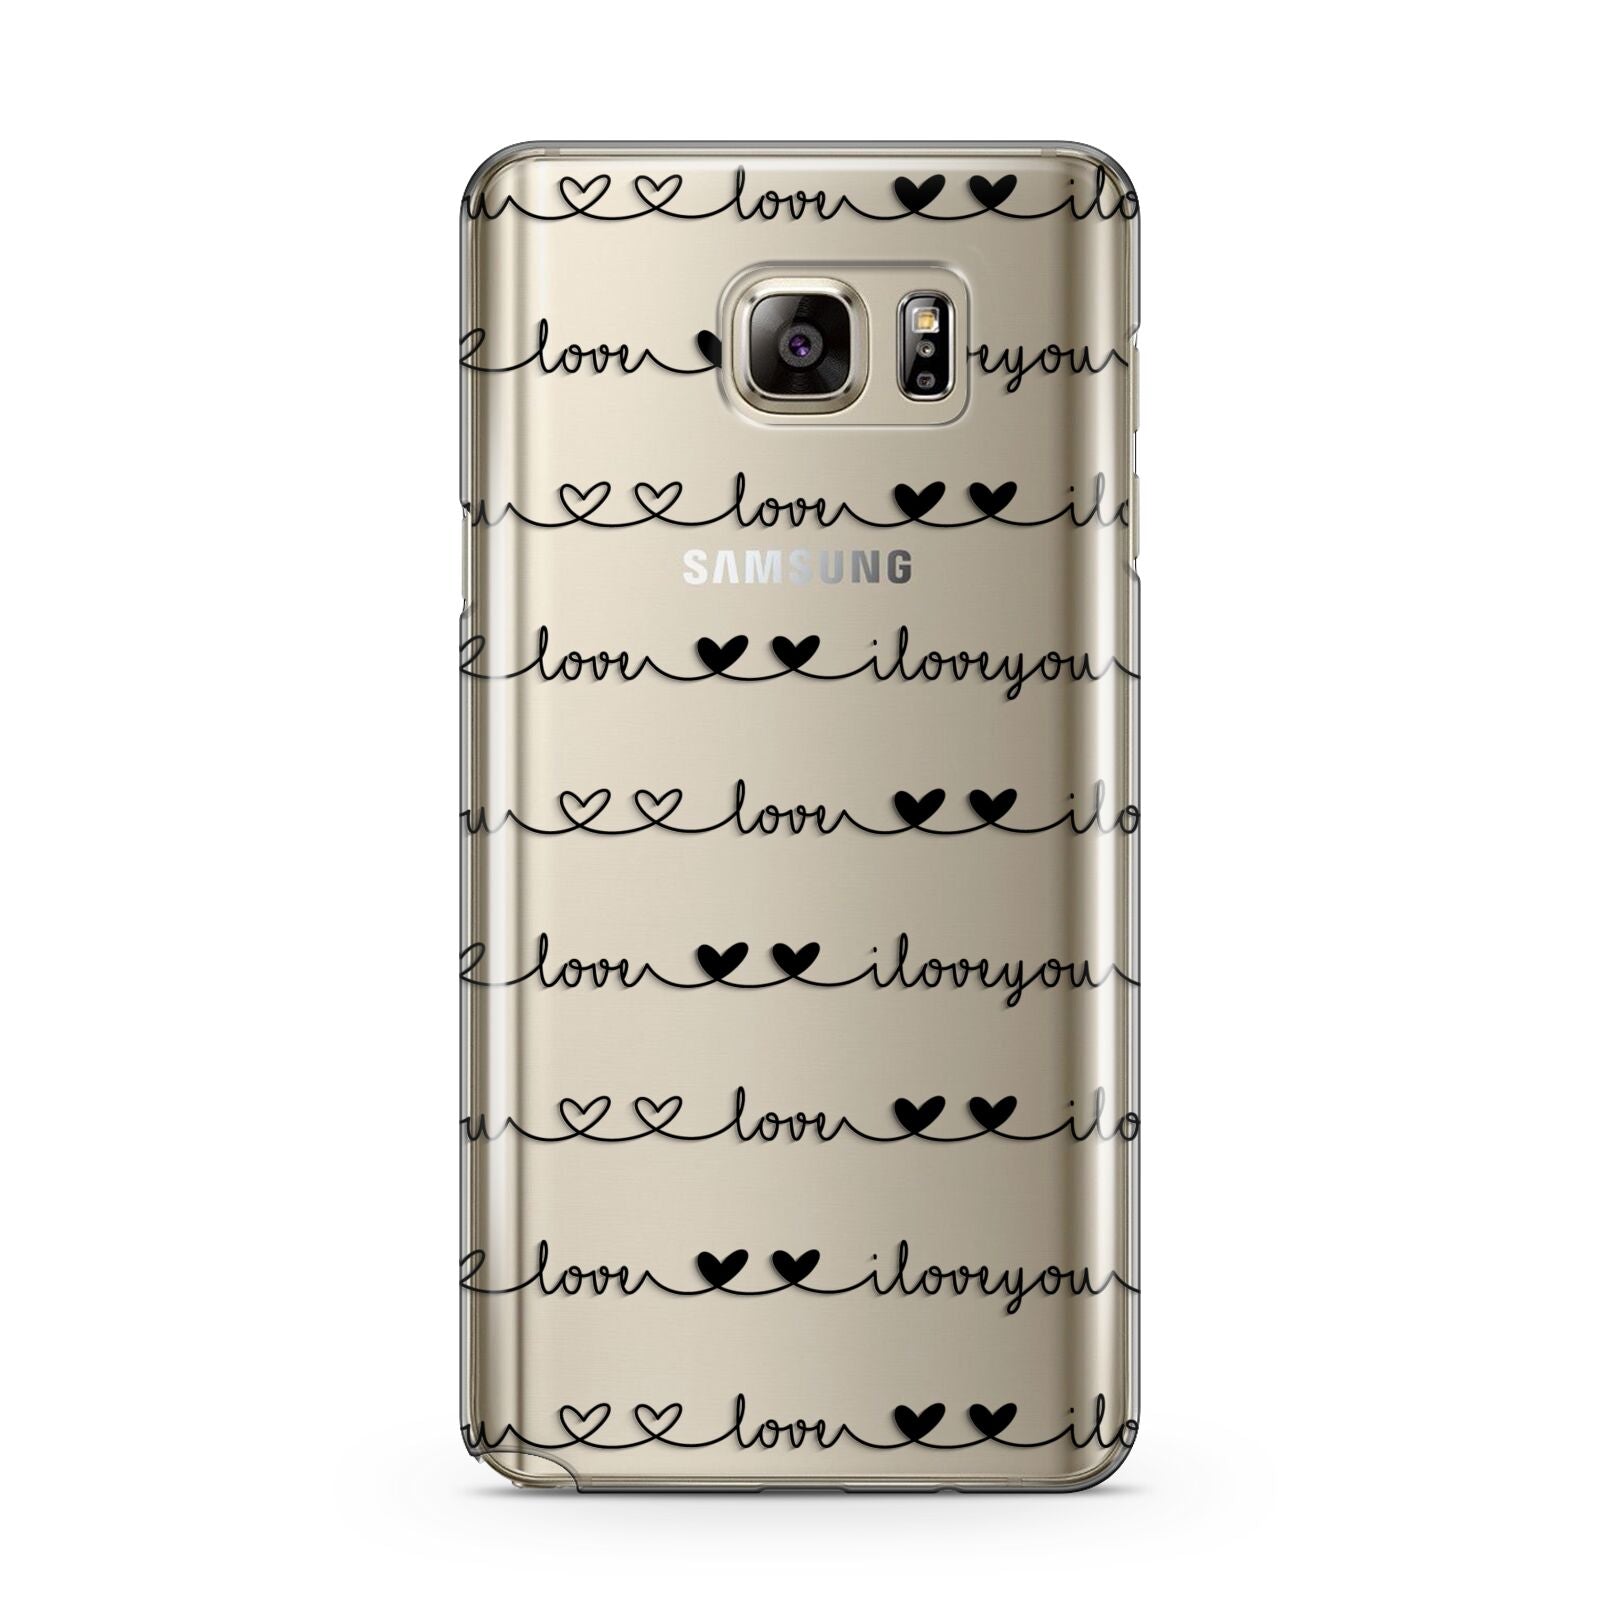 I Love You Repeat Samsung Galaxy Note 5 Case